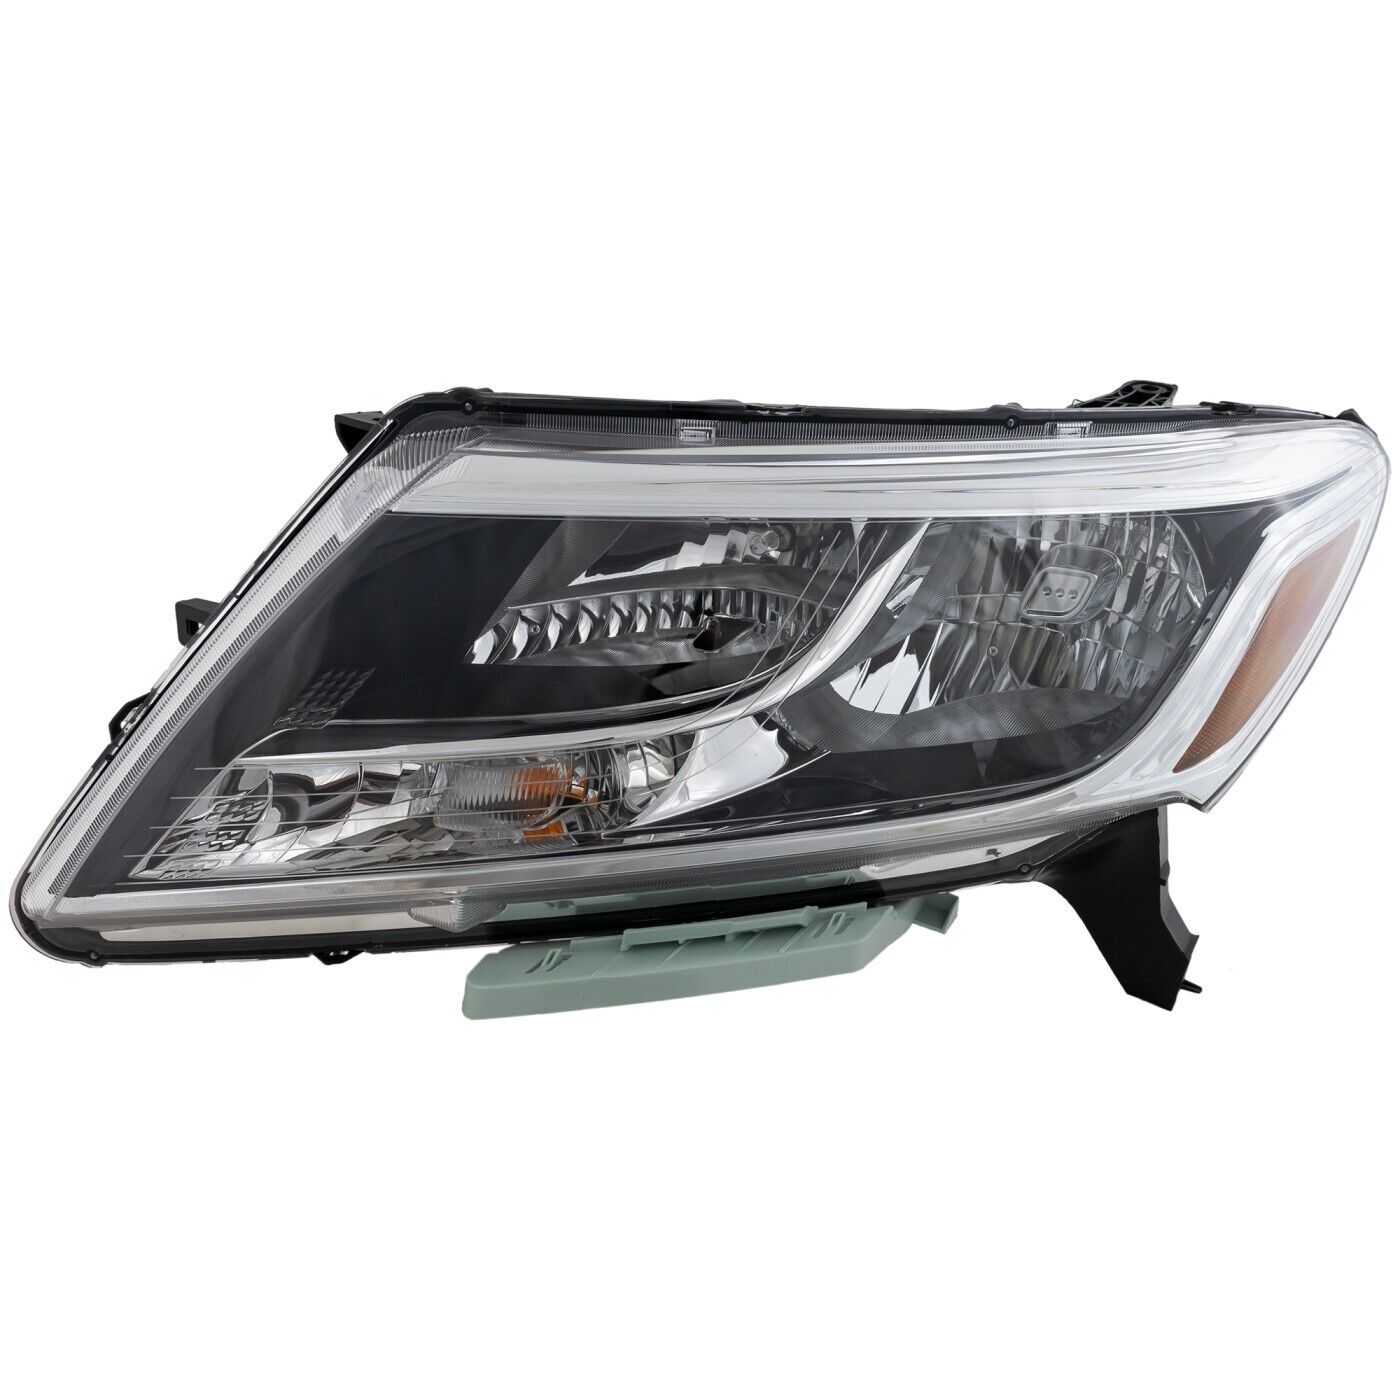 Headlight For 2013 2014 2015 2016 Nissan Pathfinder Left With Bulb